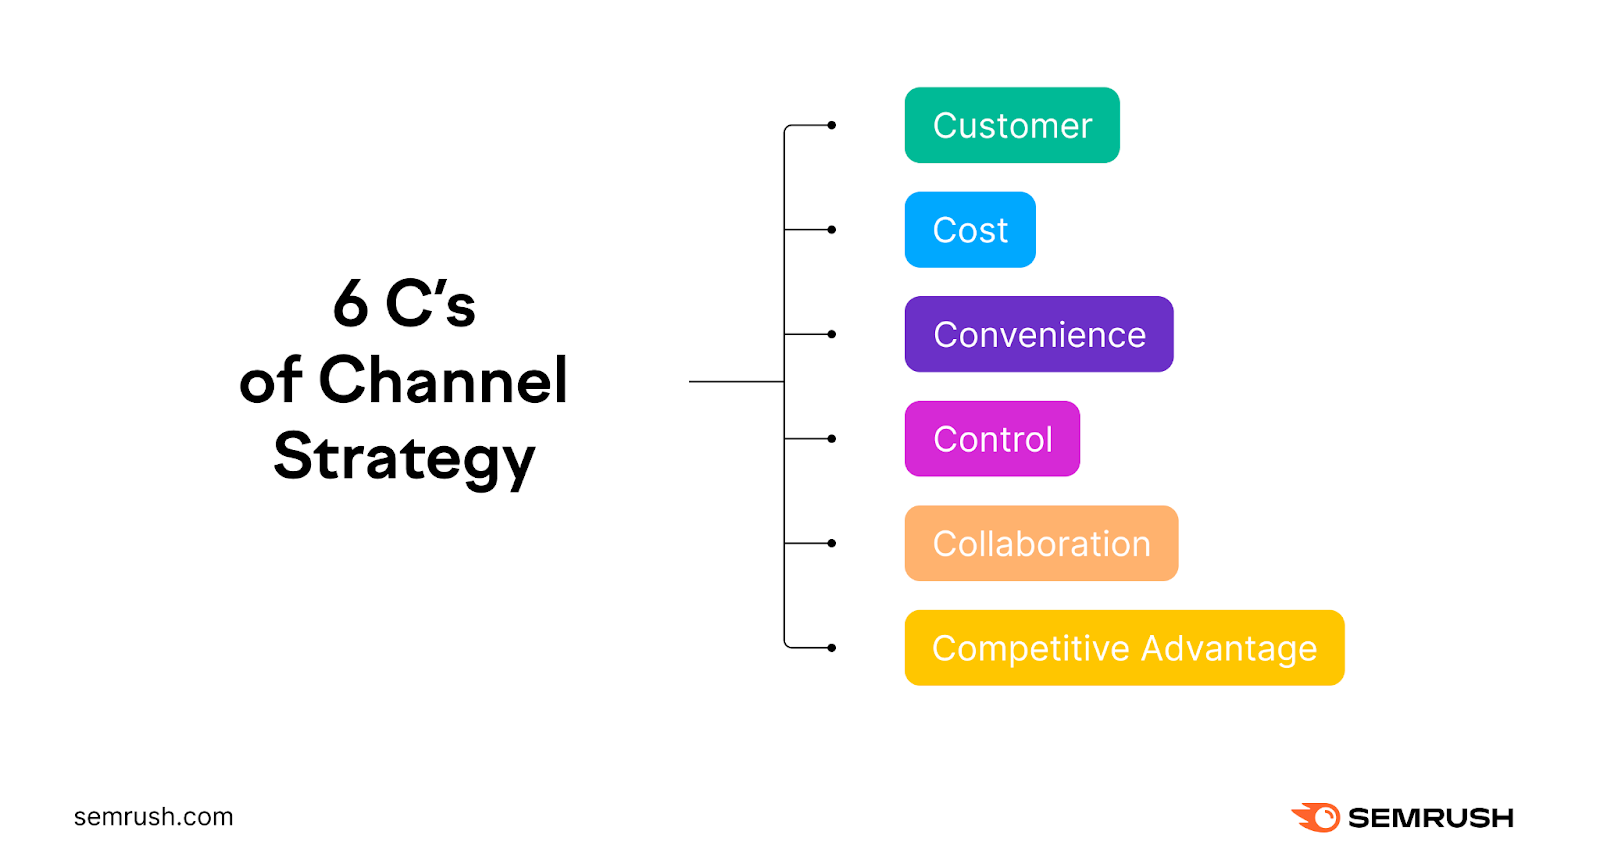 Marketing Channel Strategy 101: Everything You Need to Know